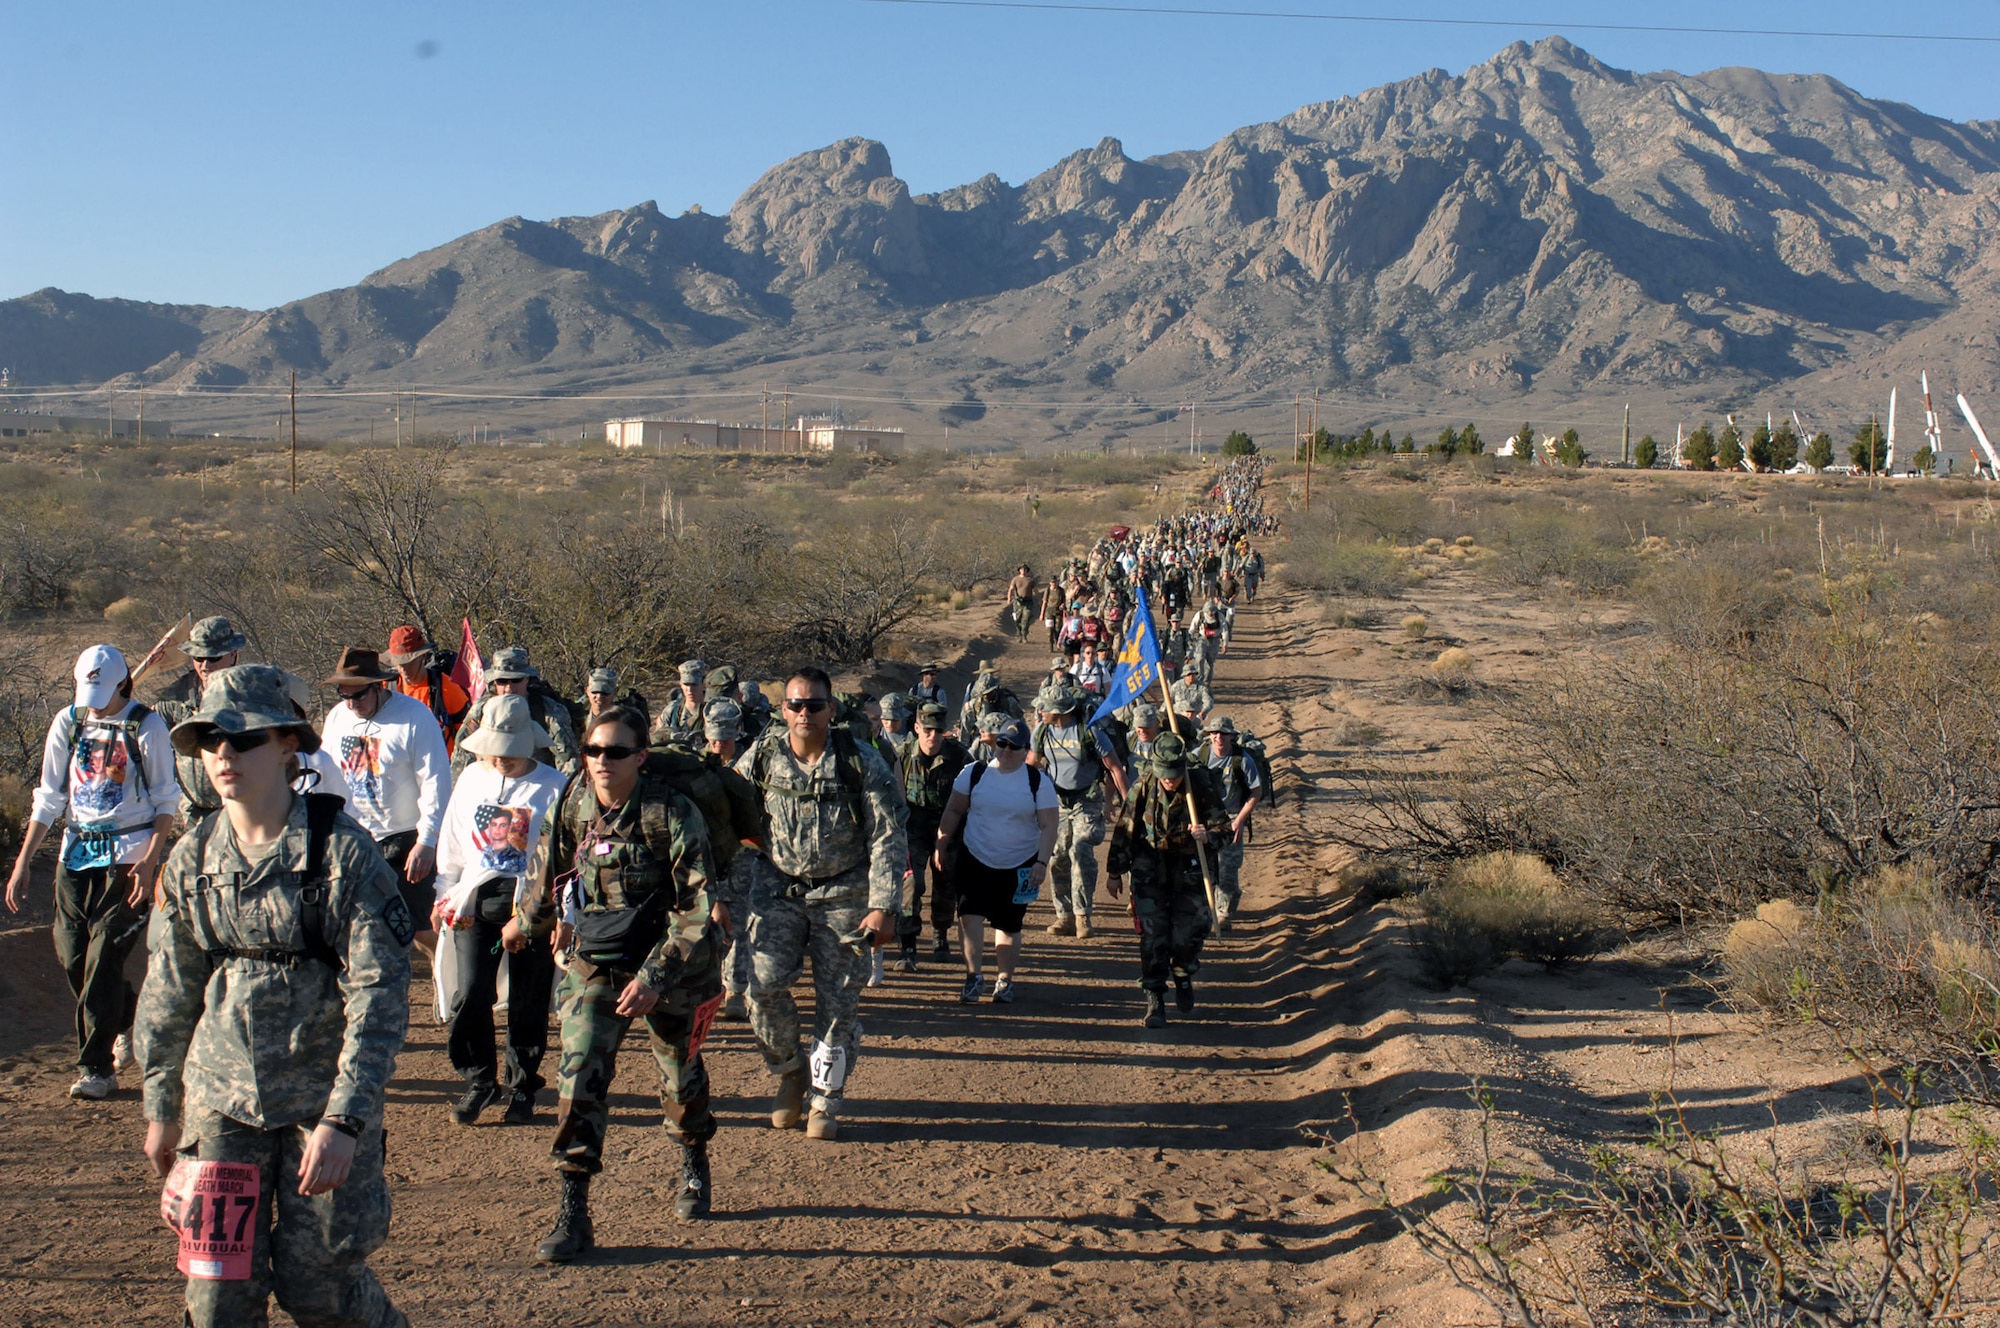 The 19th Annual Bataan Memorial Death March paid tribute to the men who died, as well as those who survived the death march and captivity, during World War II, March 30 at White Sands Missile Range, N.M. More than 4,400 military men and women from 50 states, territories and from around the world participated in the 19th annual event. (U.S. Air Force photo/Greg Allen) 
